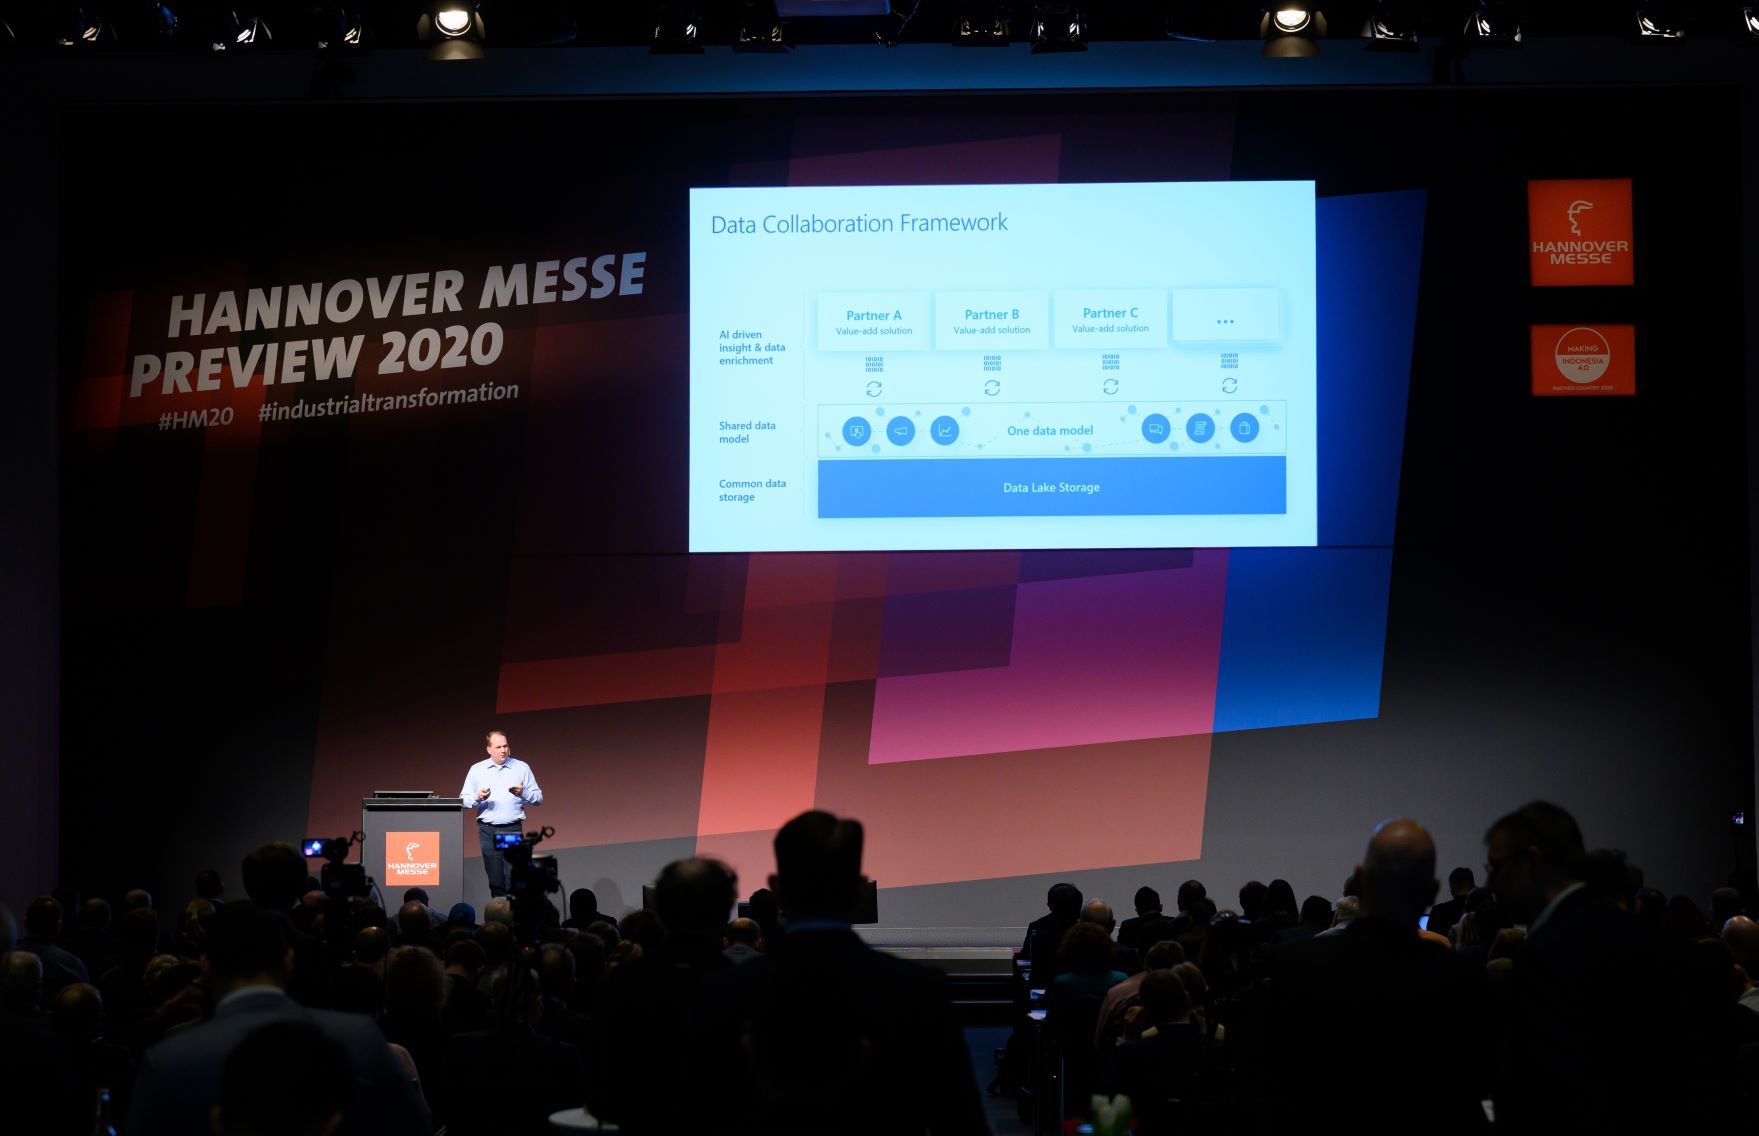 Christoph Berlin keynote at the 2020 Hannover Messe Preview